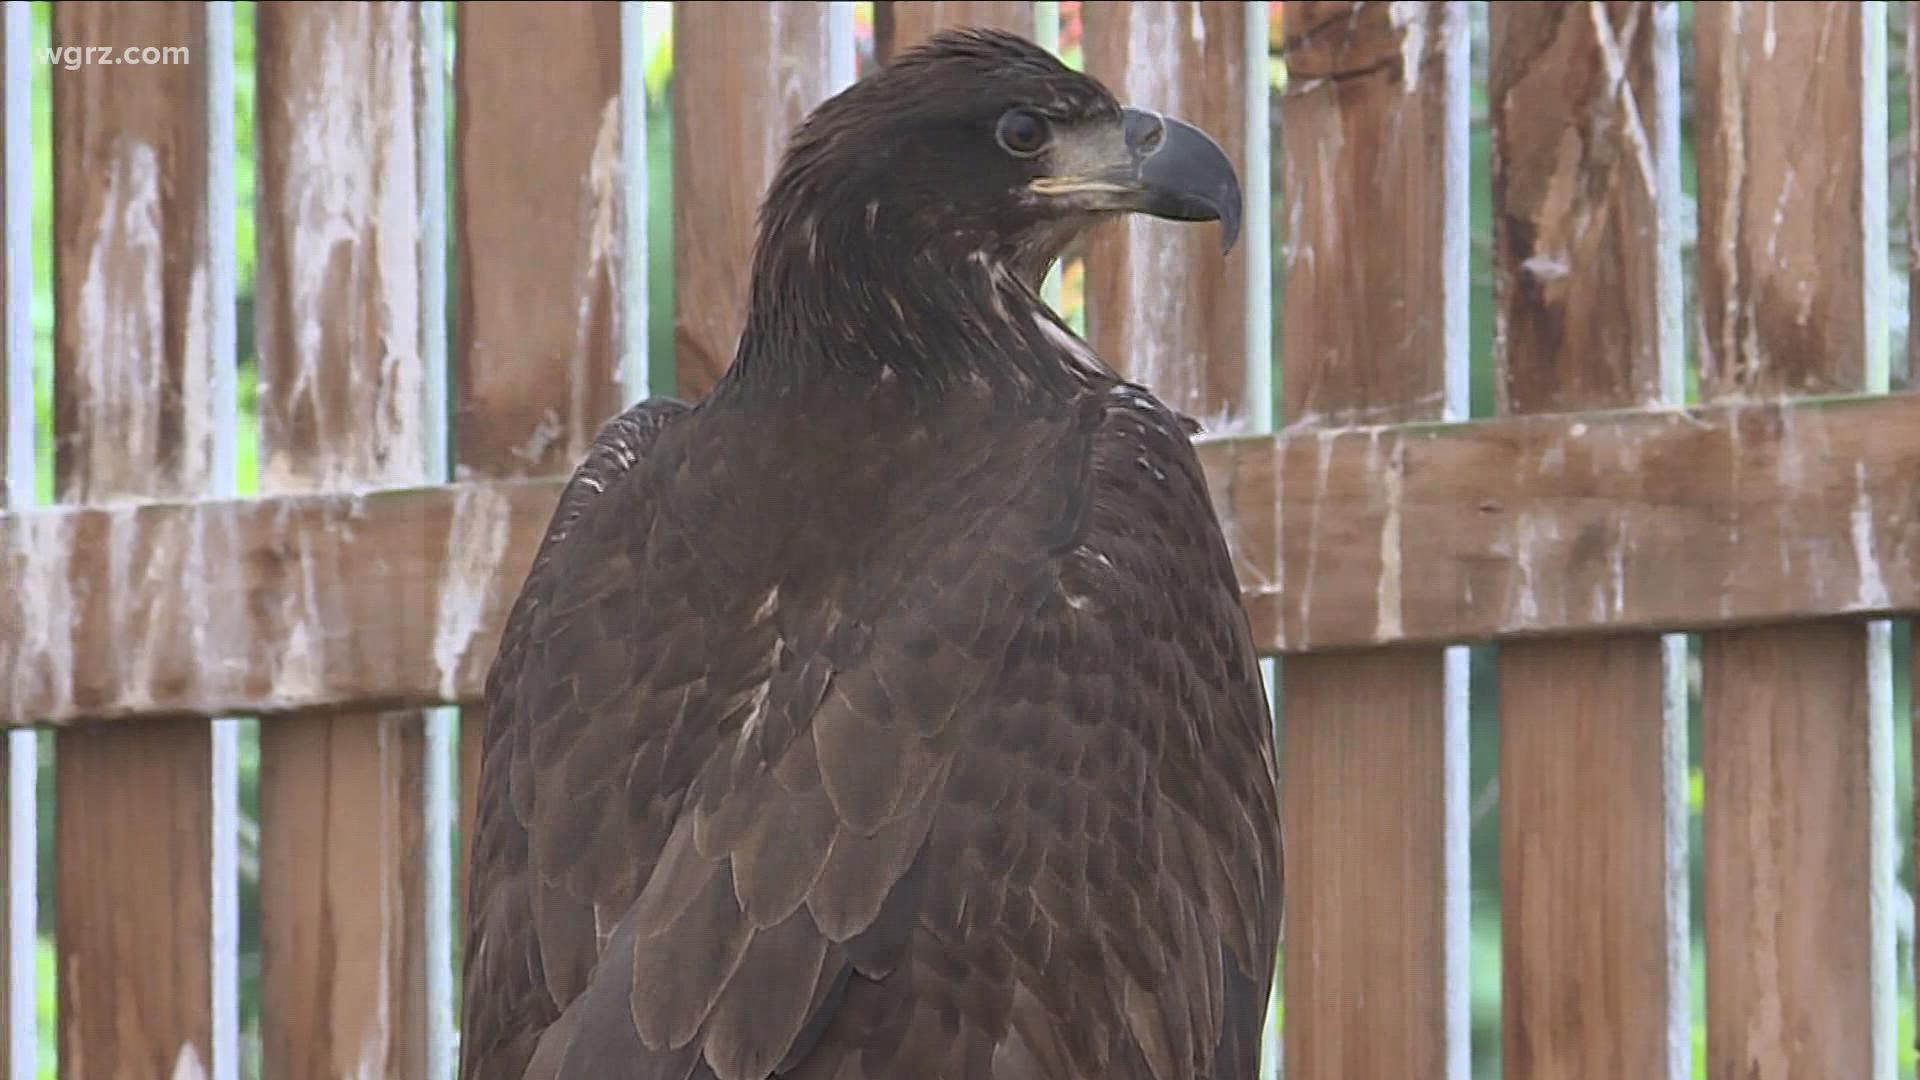 After hitting a downtown building in May, the eagle has since recovered and was recently released.